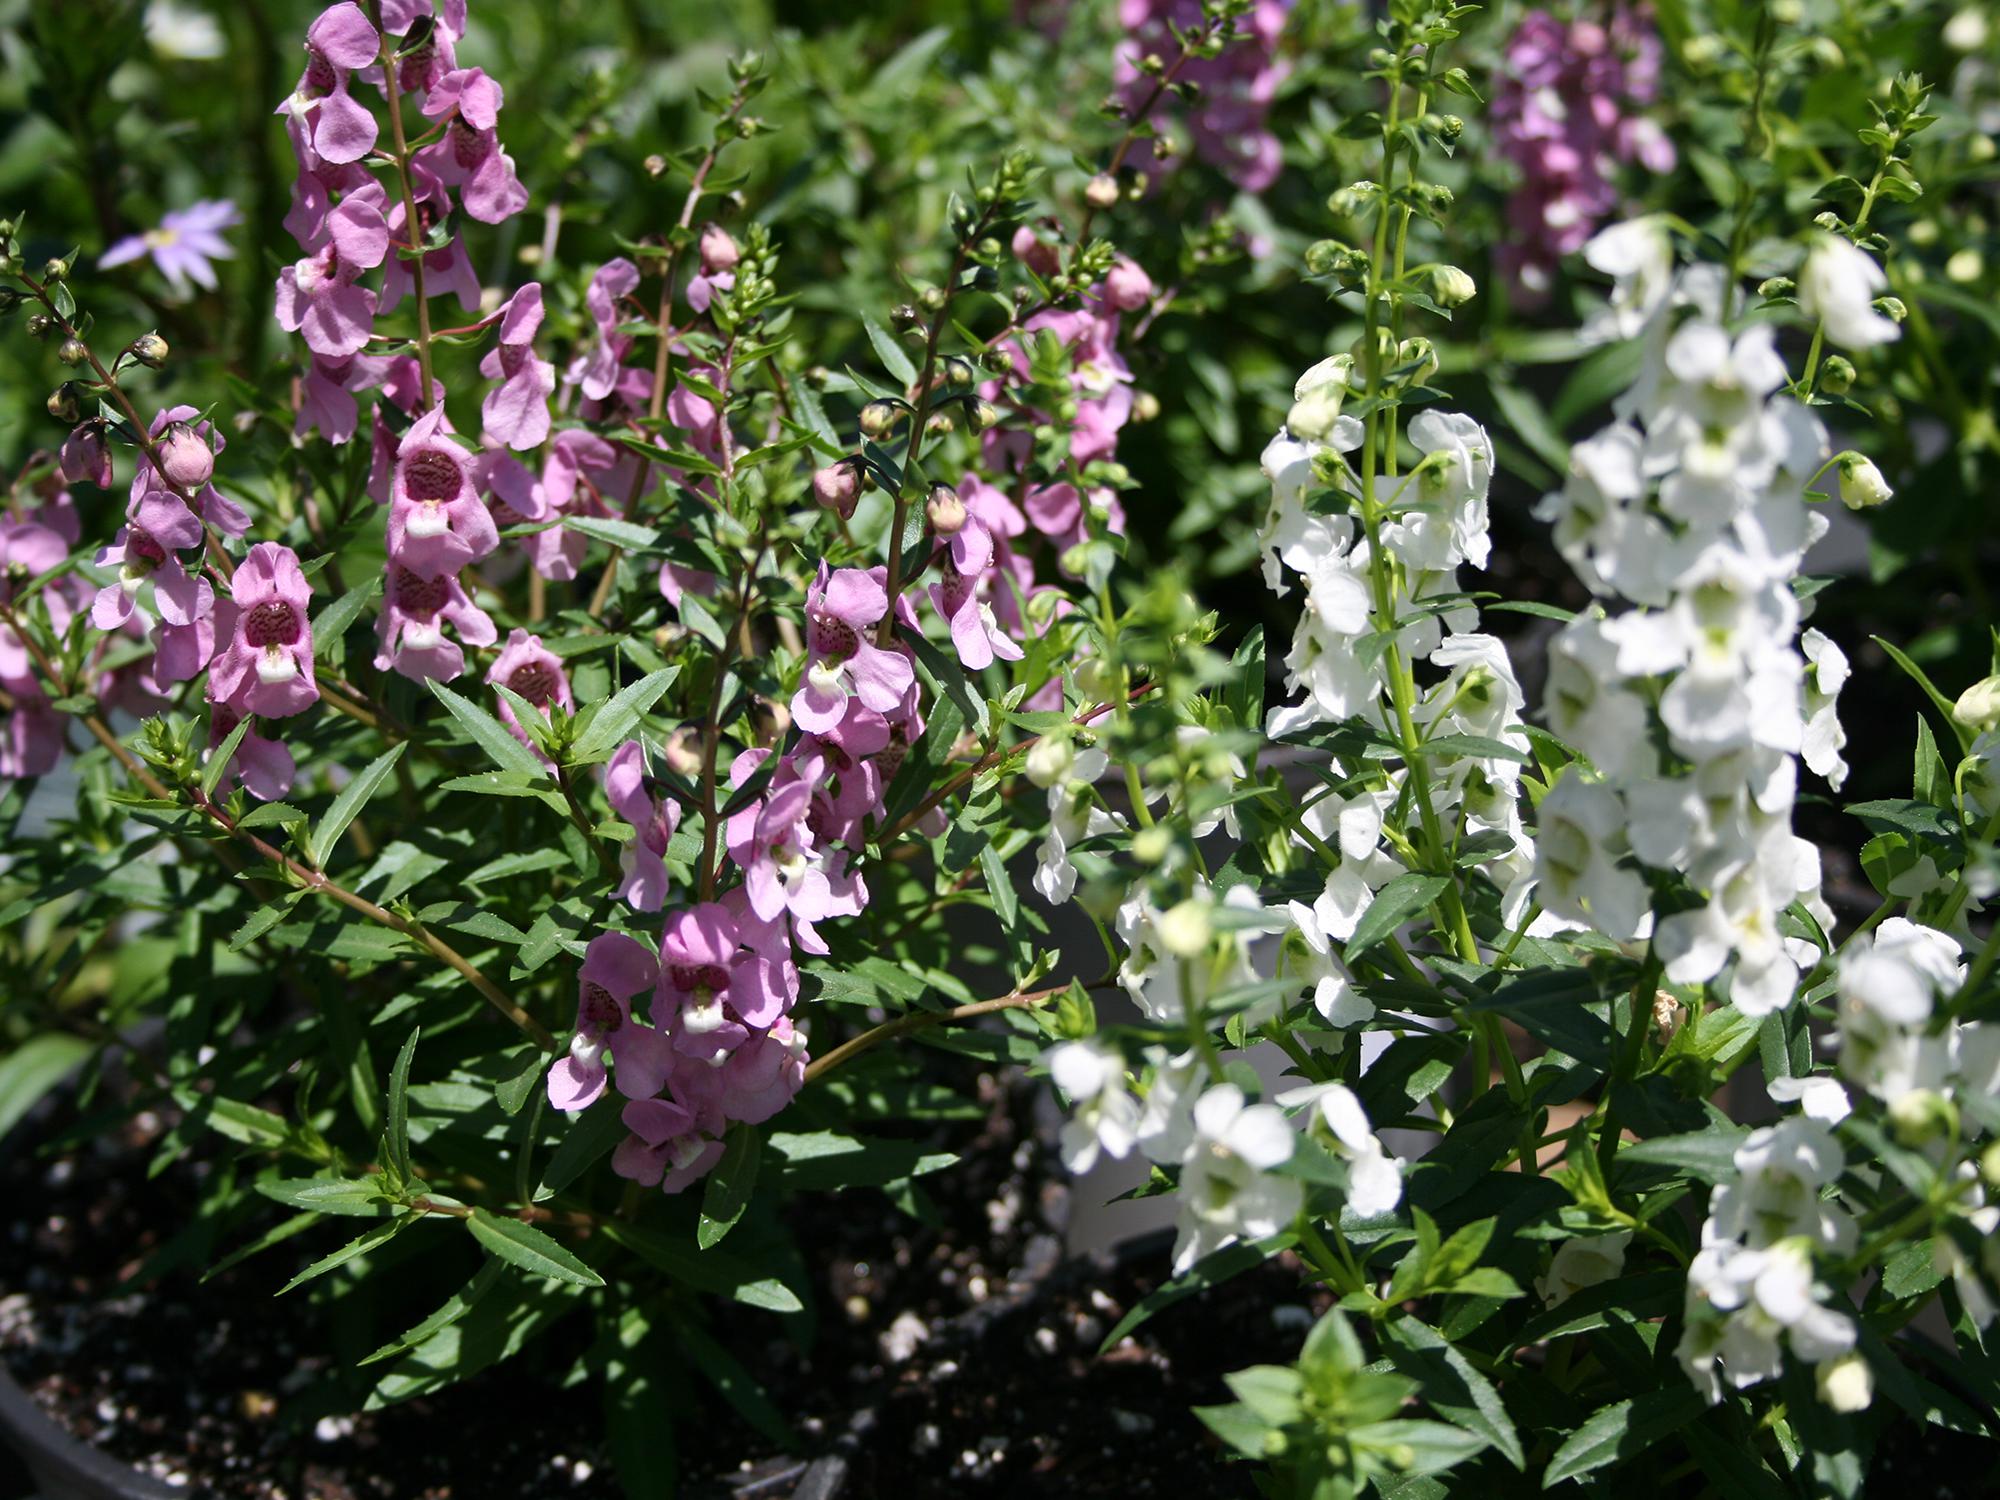 A member of the snapdragon family, the Serena Angelonia will grow to 1 foot tall and spread up to 14 inches. (Photo by MSU Extension Service/Gary Bachman)